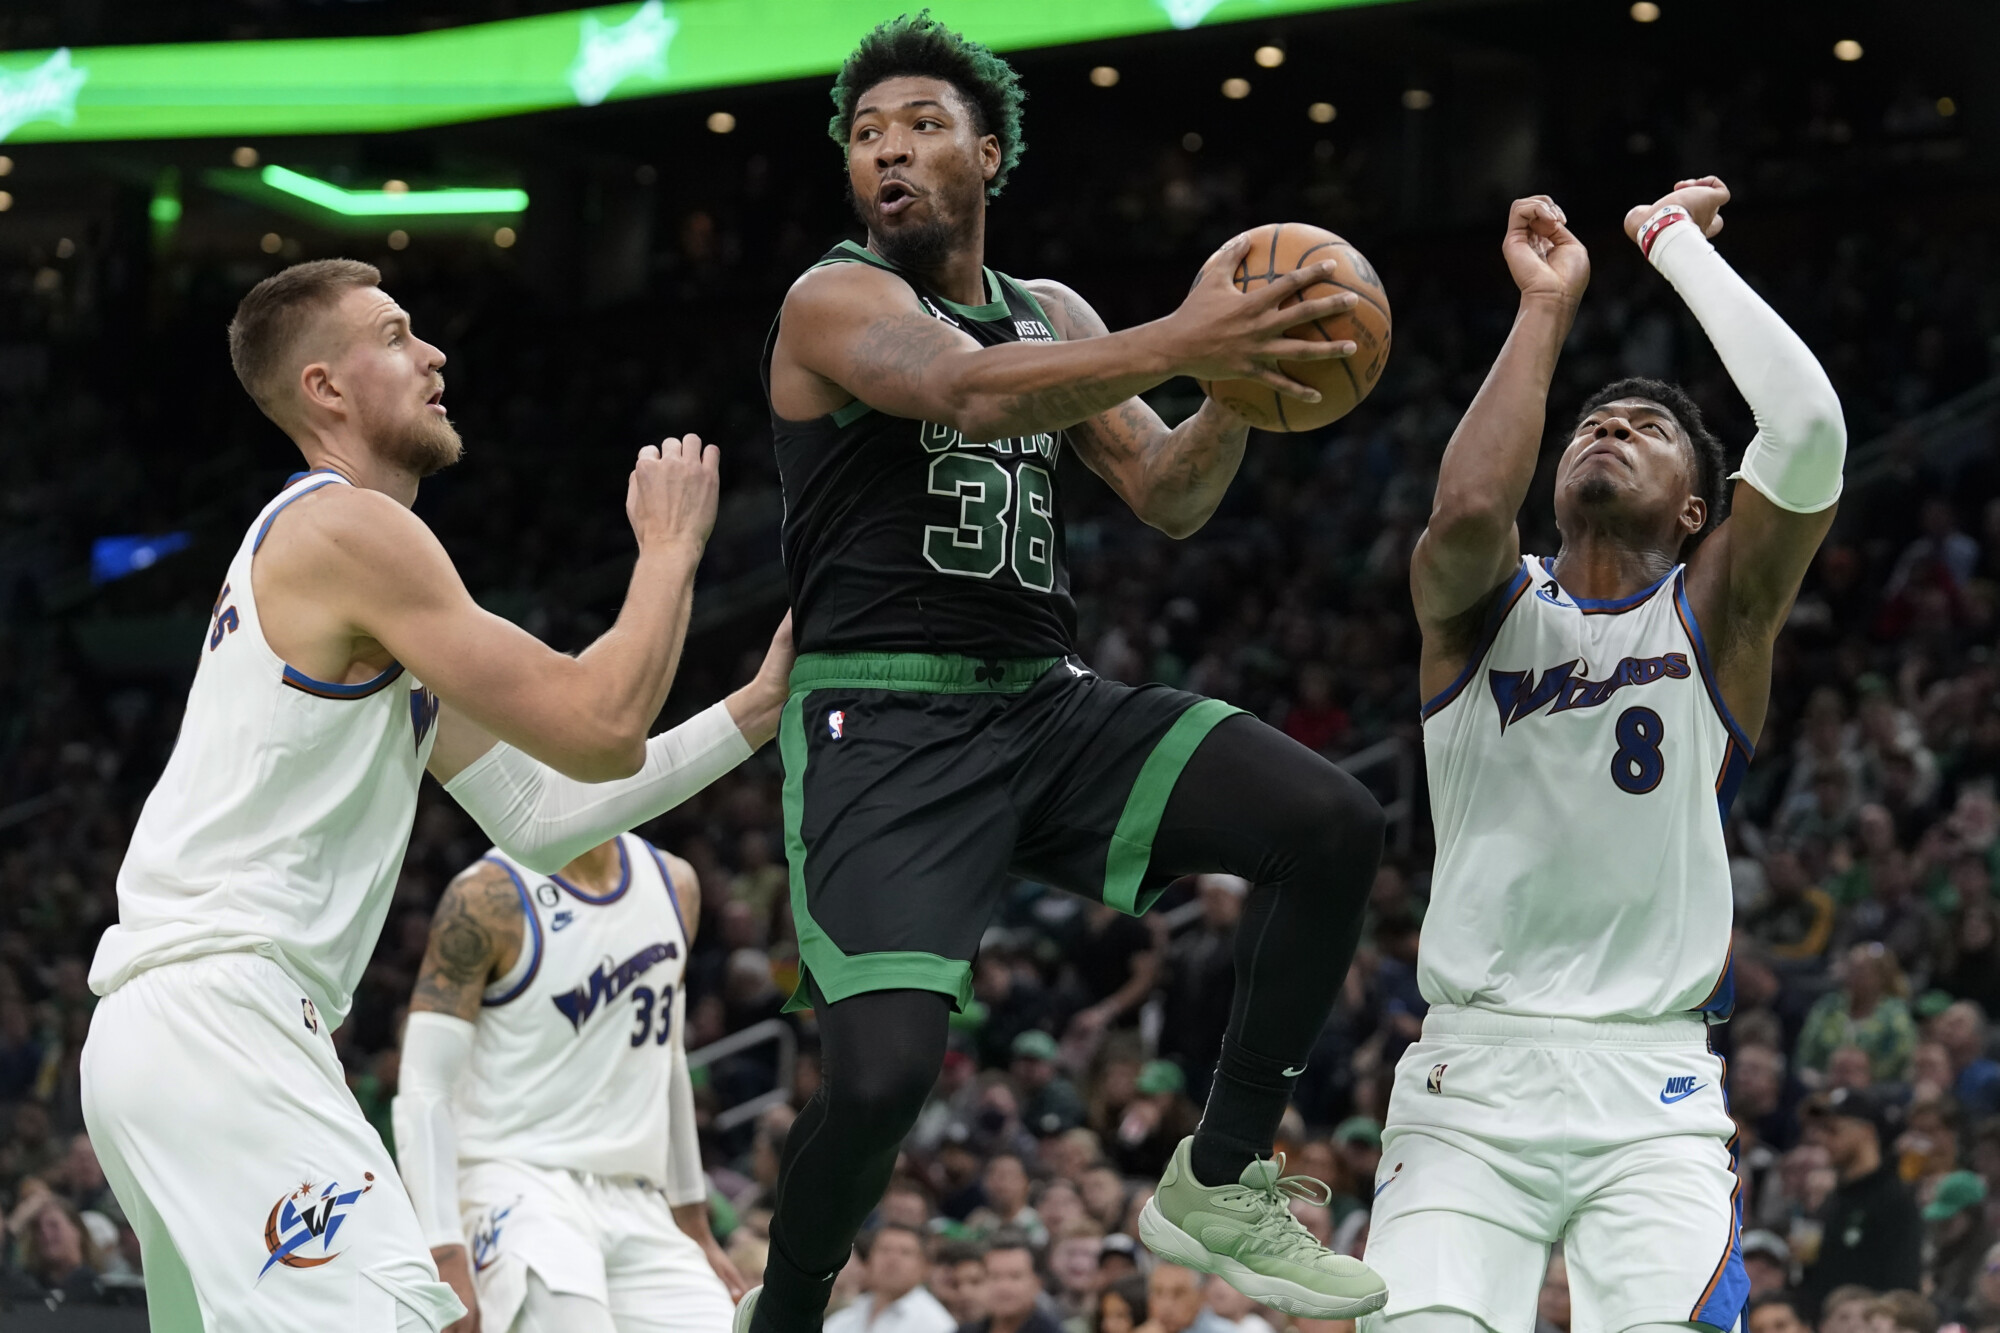 Marcus Smart Wants It Known There's No Beef Between Him and Jaylen